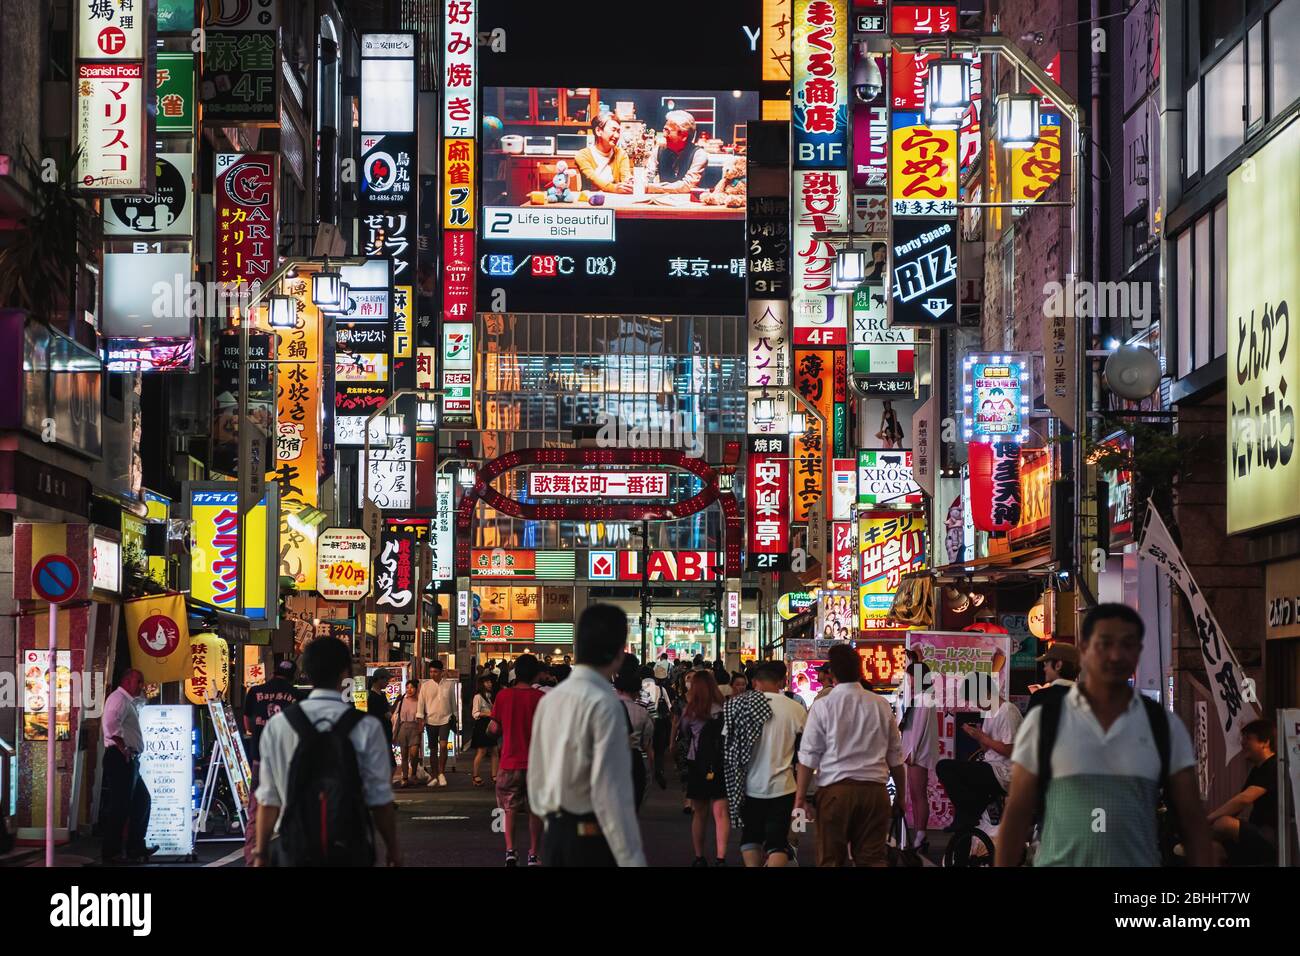 Neon signs line Shinjuku and Shibuya district. The area is a nightlife district known as Sleepless city. Stock Photo